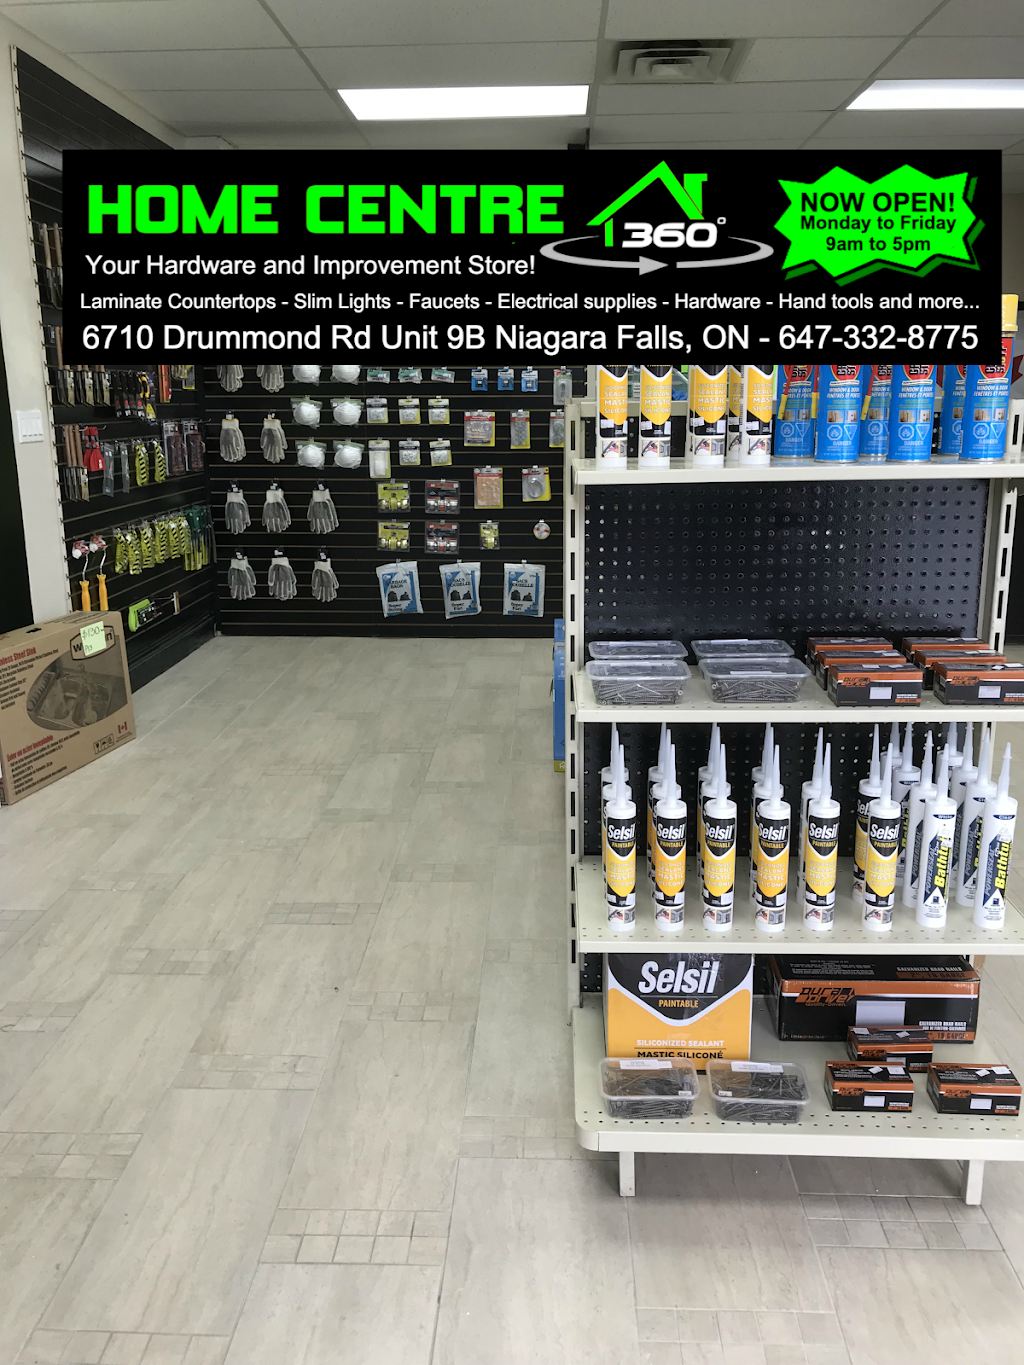 Home Centre 360 | furniture store | 6710 Drummond Rd Unit 9B, Niagara Falls, ON L2G 4P1, Canada | 6473328775 OR +1 647-332-8775